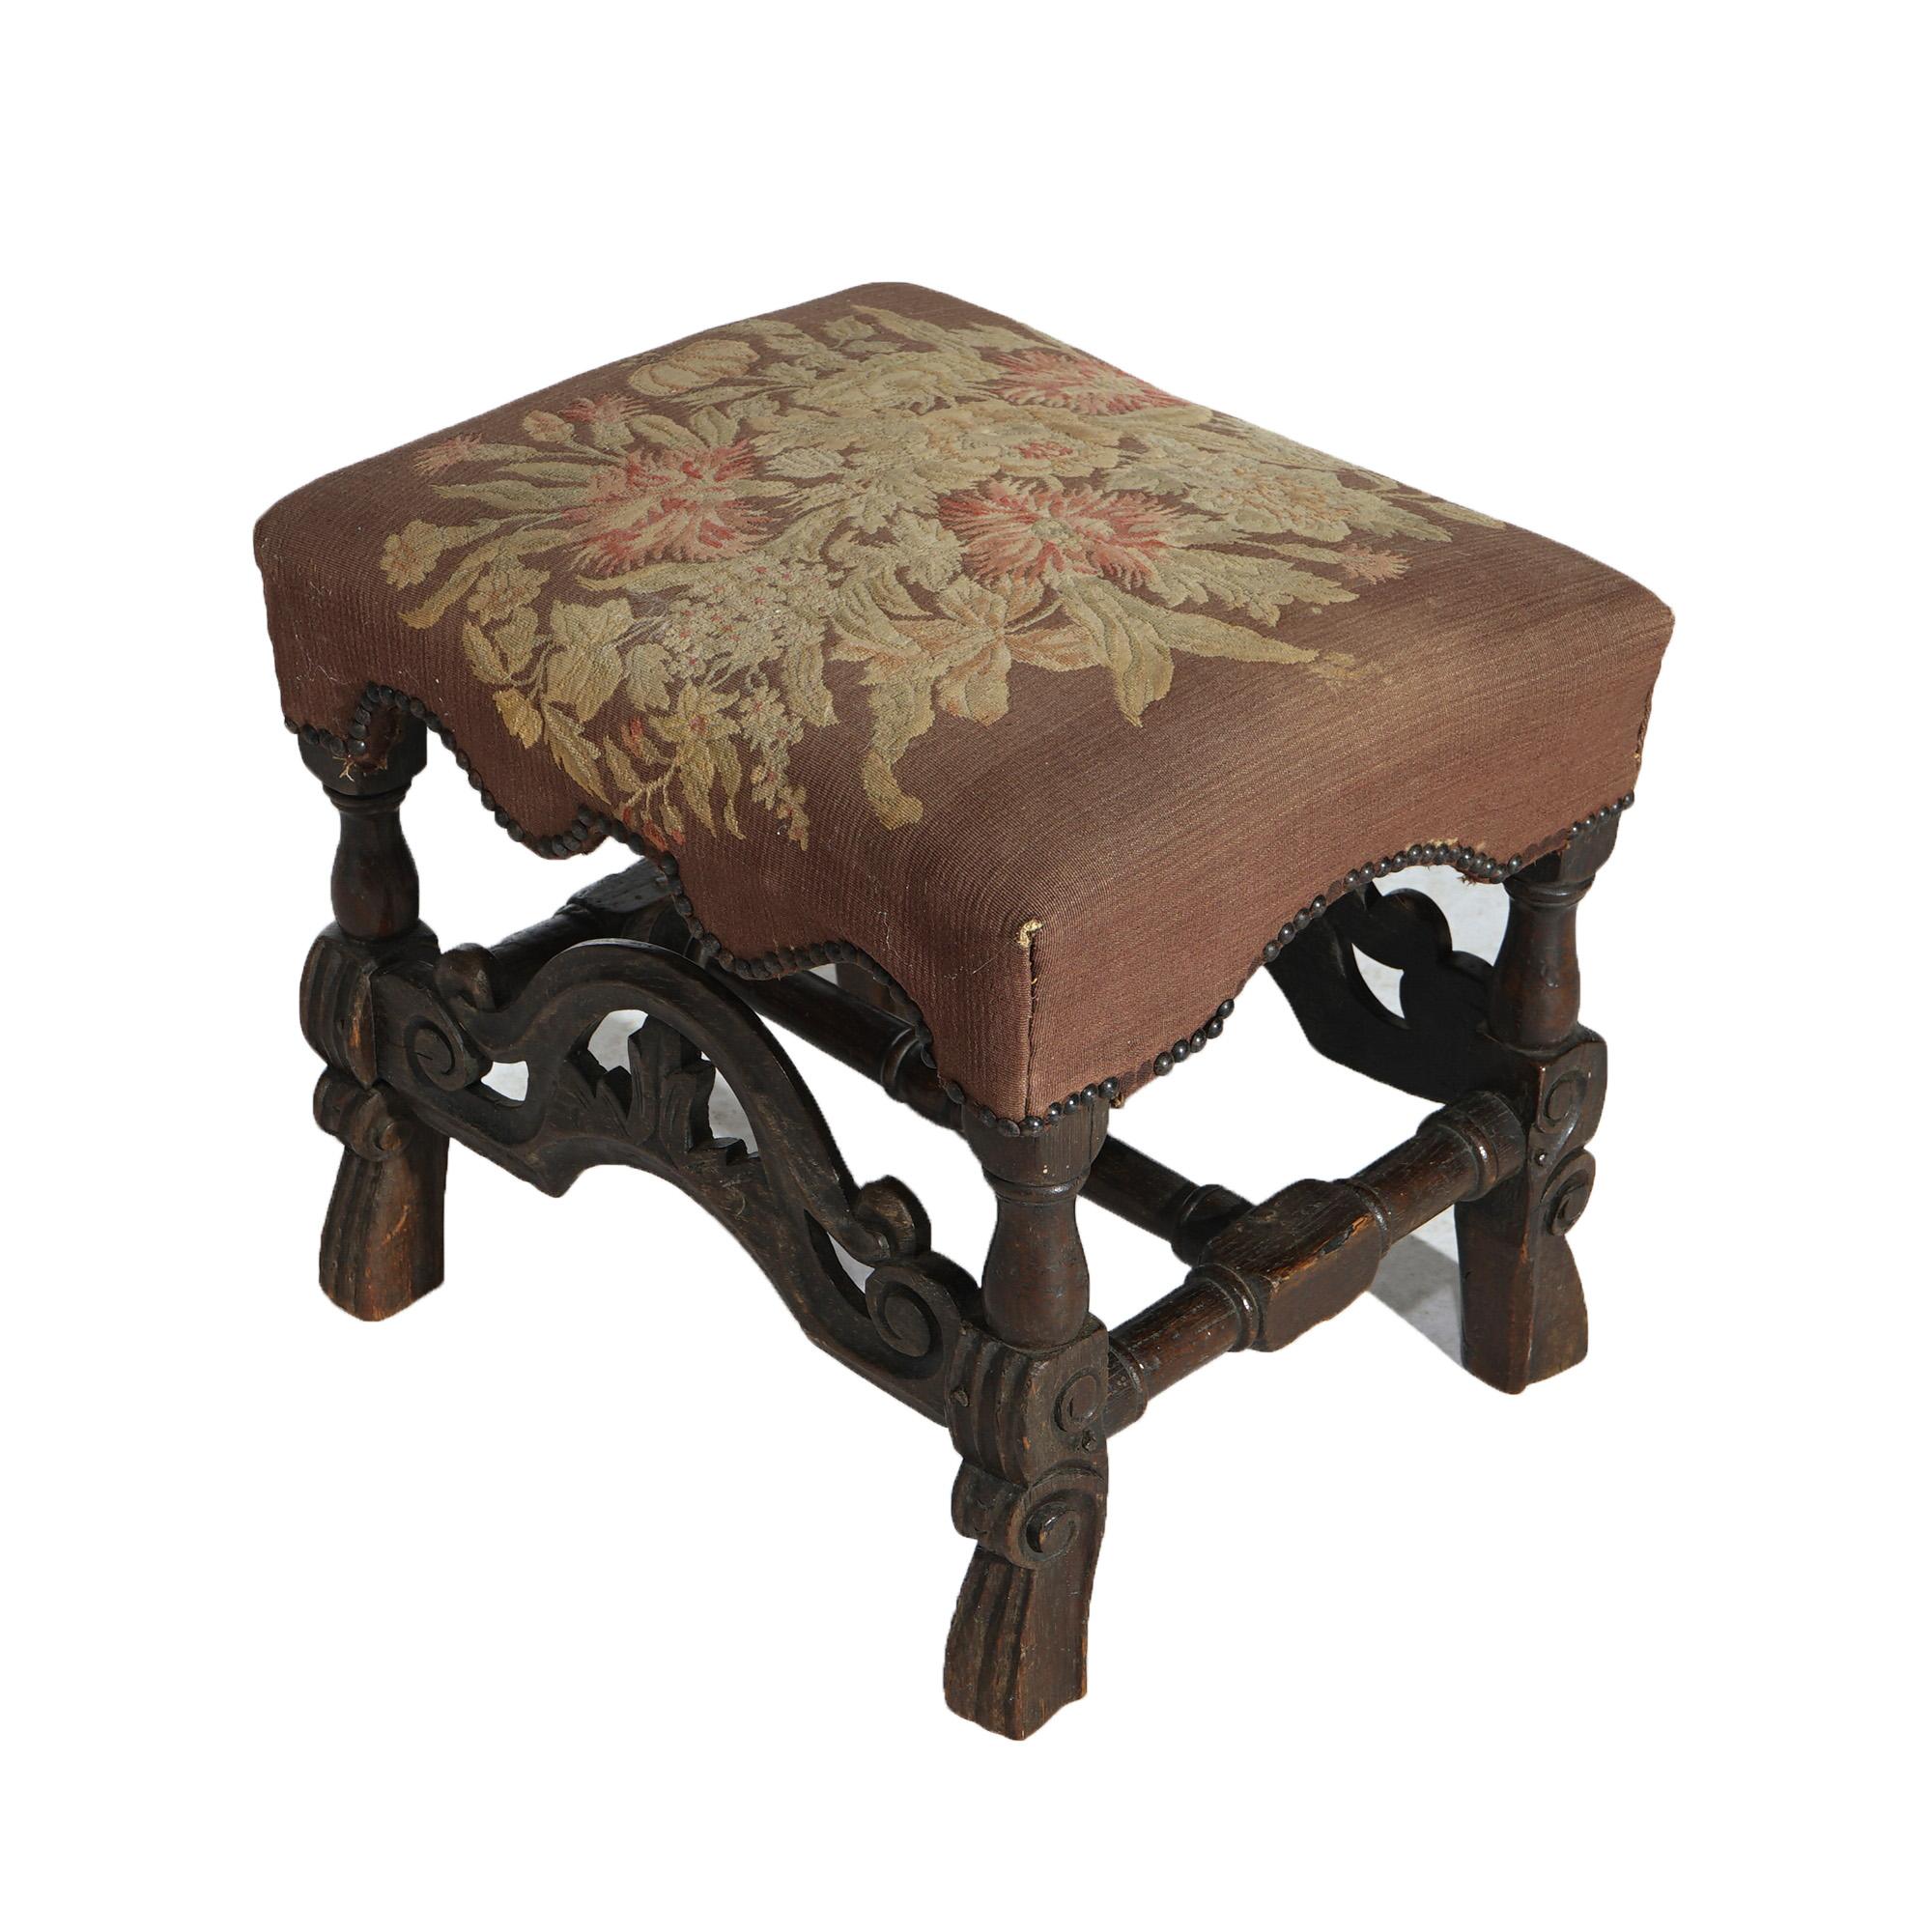 Early Antique English Carved Walnut & Needlepoint Bench (Stool) Circa 1690 For Sale 4